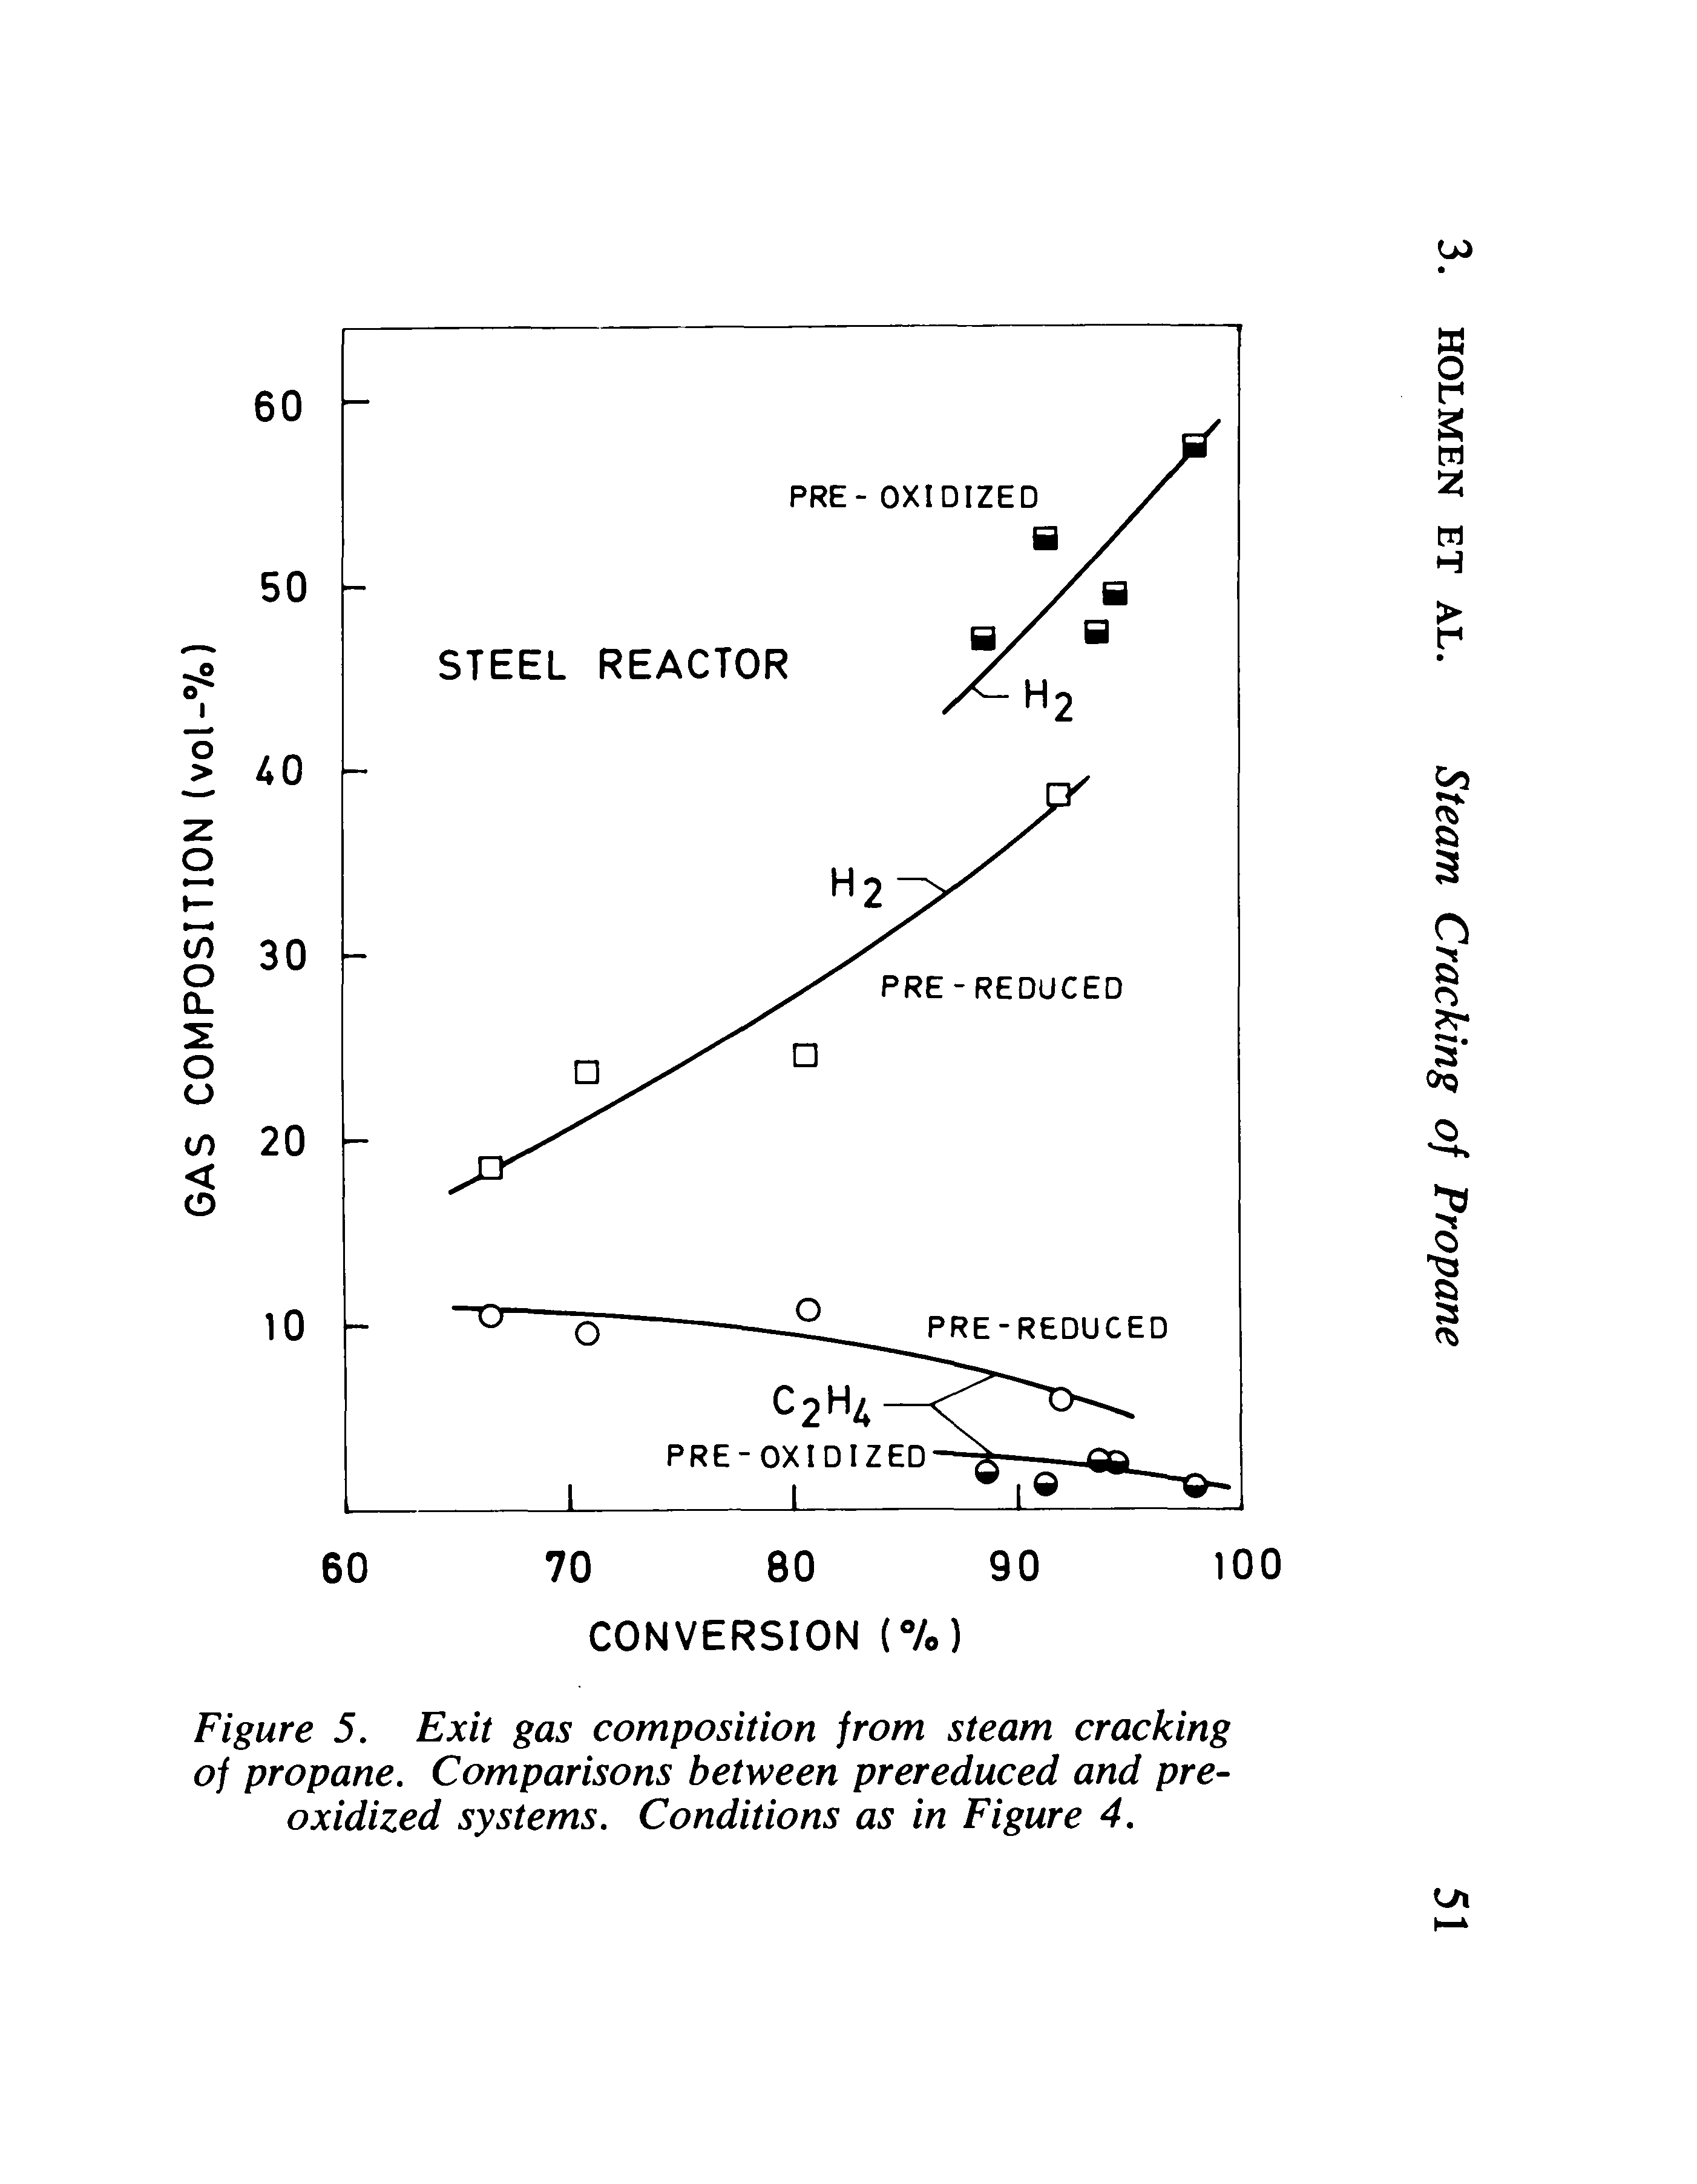 Figure 5. Exit gas composition from steam cracking of propane. Comparisons between prereduced and preoxidized systems. Conditions as in Figure 4.